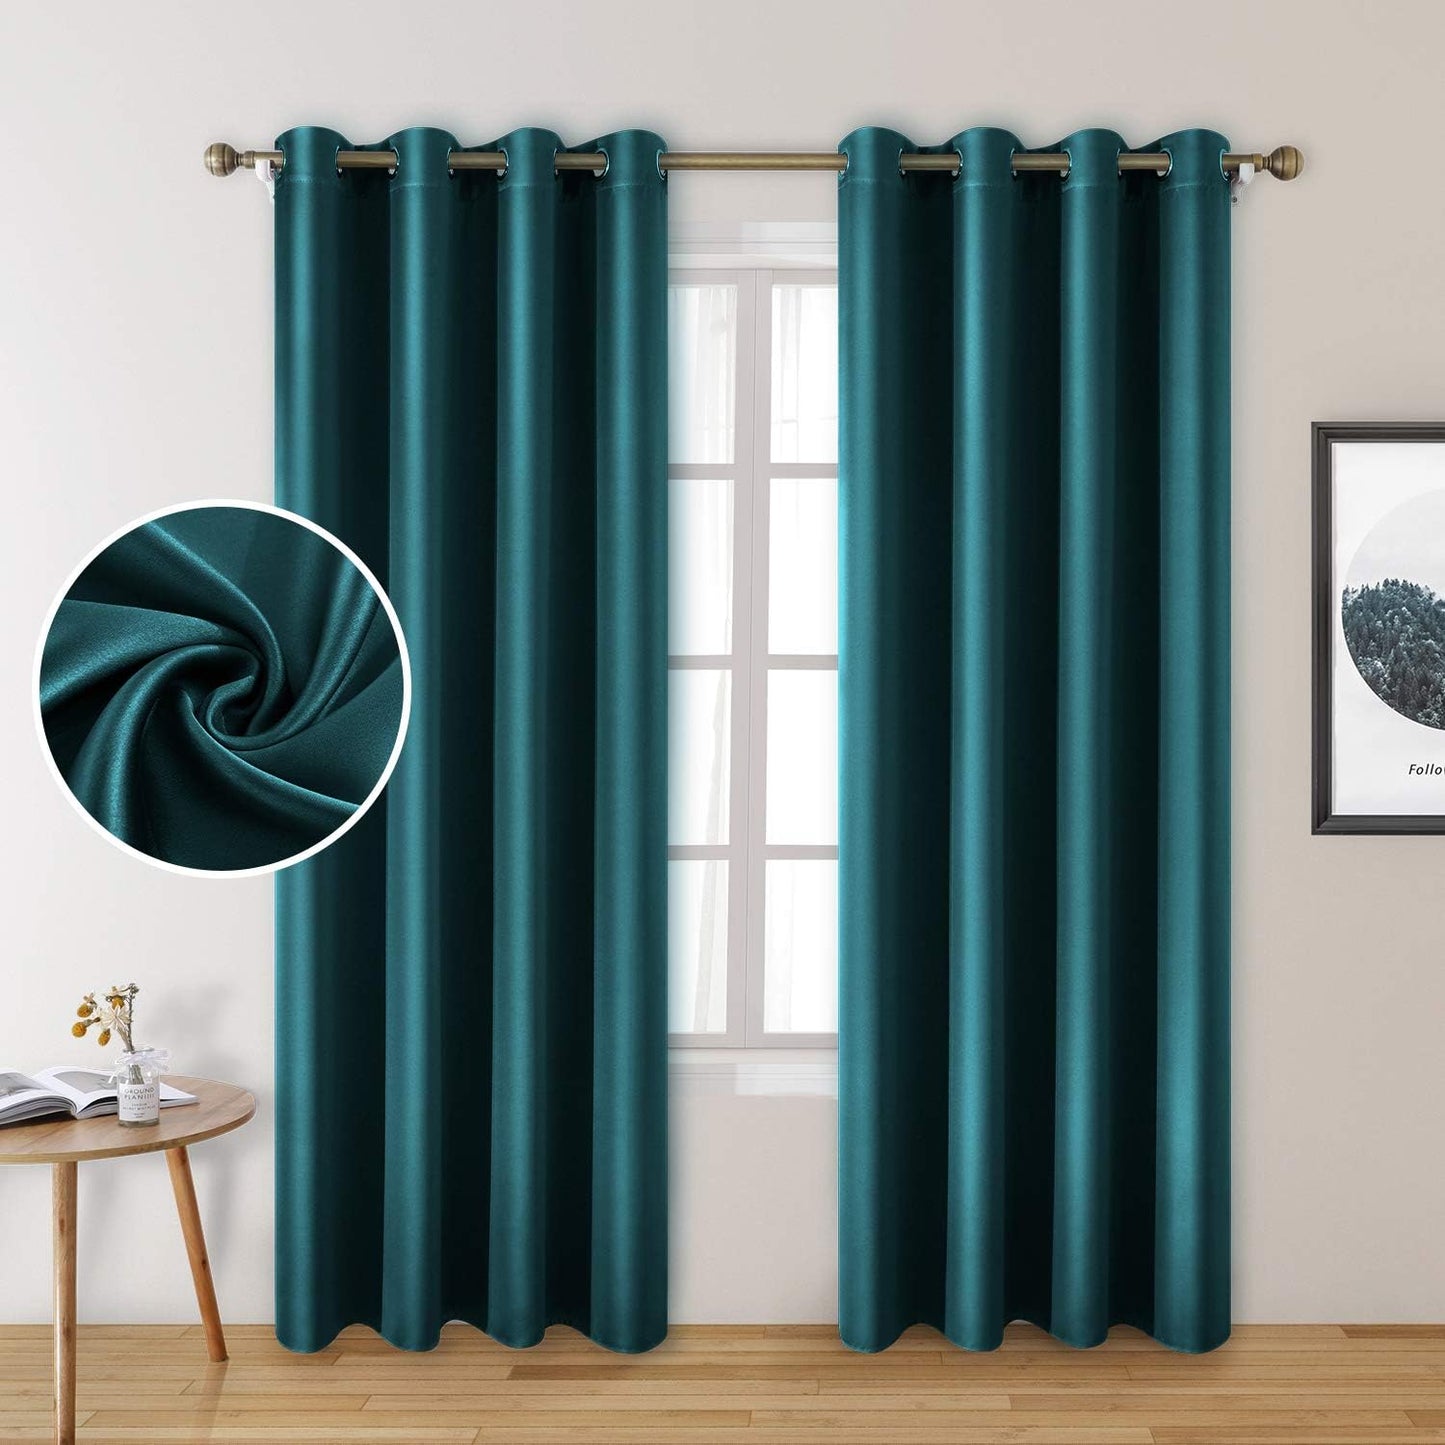 HOMEIDEAS Gold Blackout Curtains, Faux Silk for Bedroom 52 X 84 Inch Room Darkening Satin Thermal Insulated Drapes for Window, Indoor, Living Room, 2 Panels  HOMEIDEAS Teal 52" X 84" 